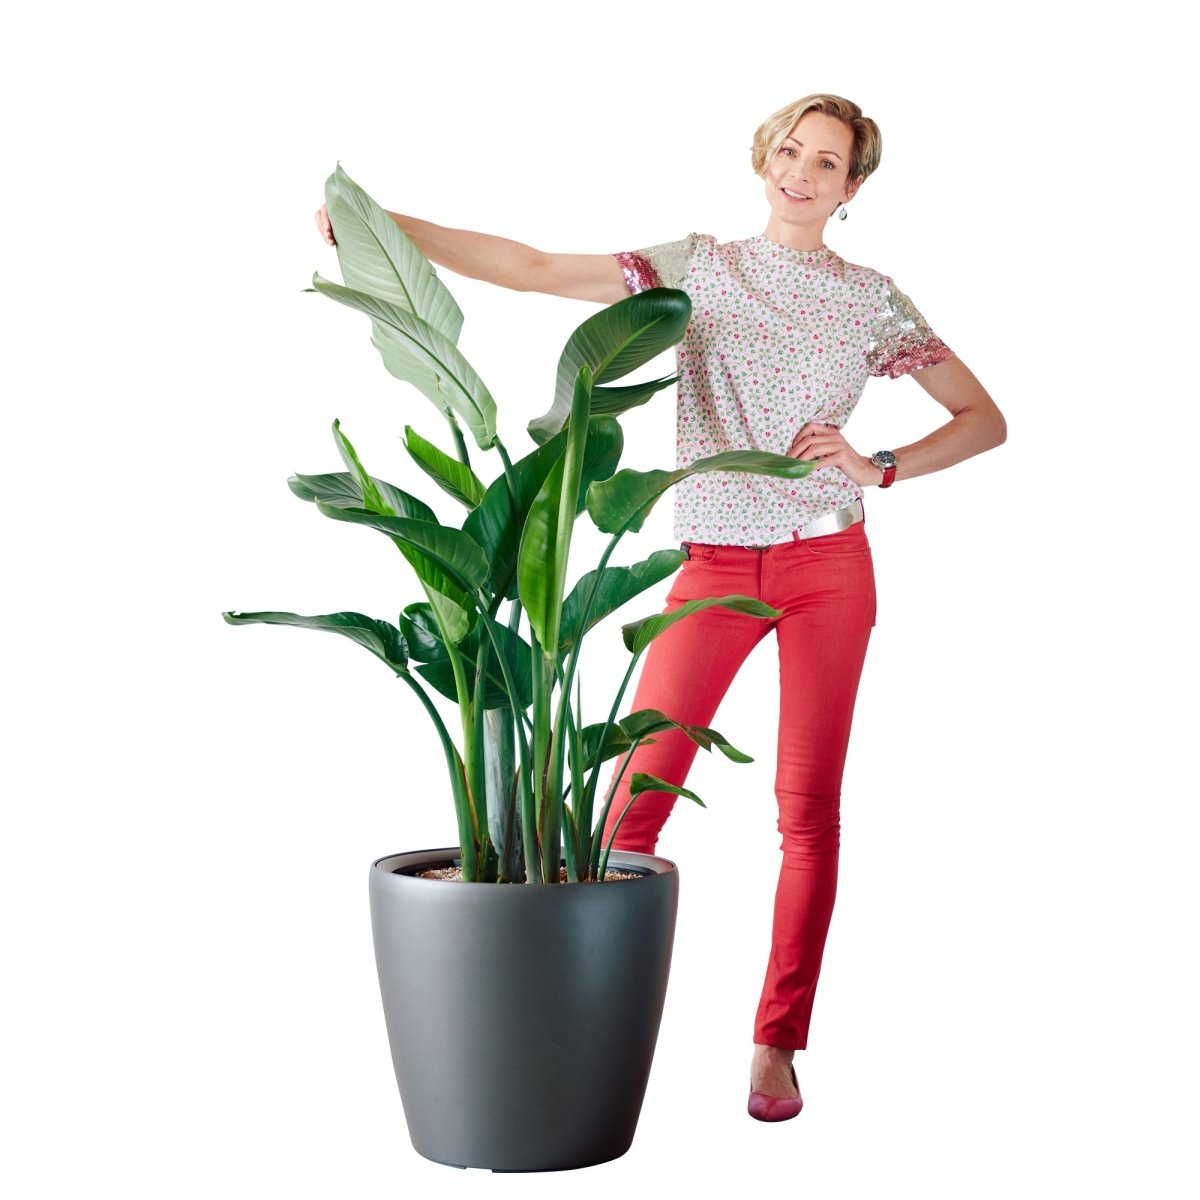 XL Bird of Paradise Plant Potted In Lechuza Classico 50 Planter - Charcoal Metallic - My City Plants